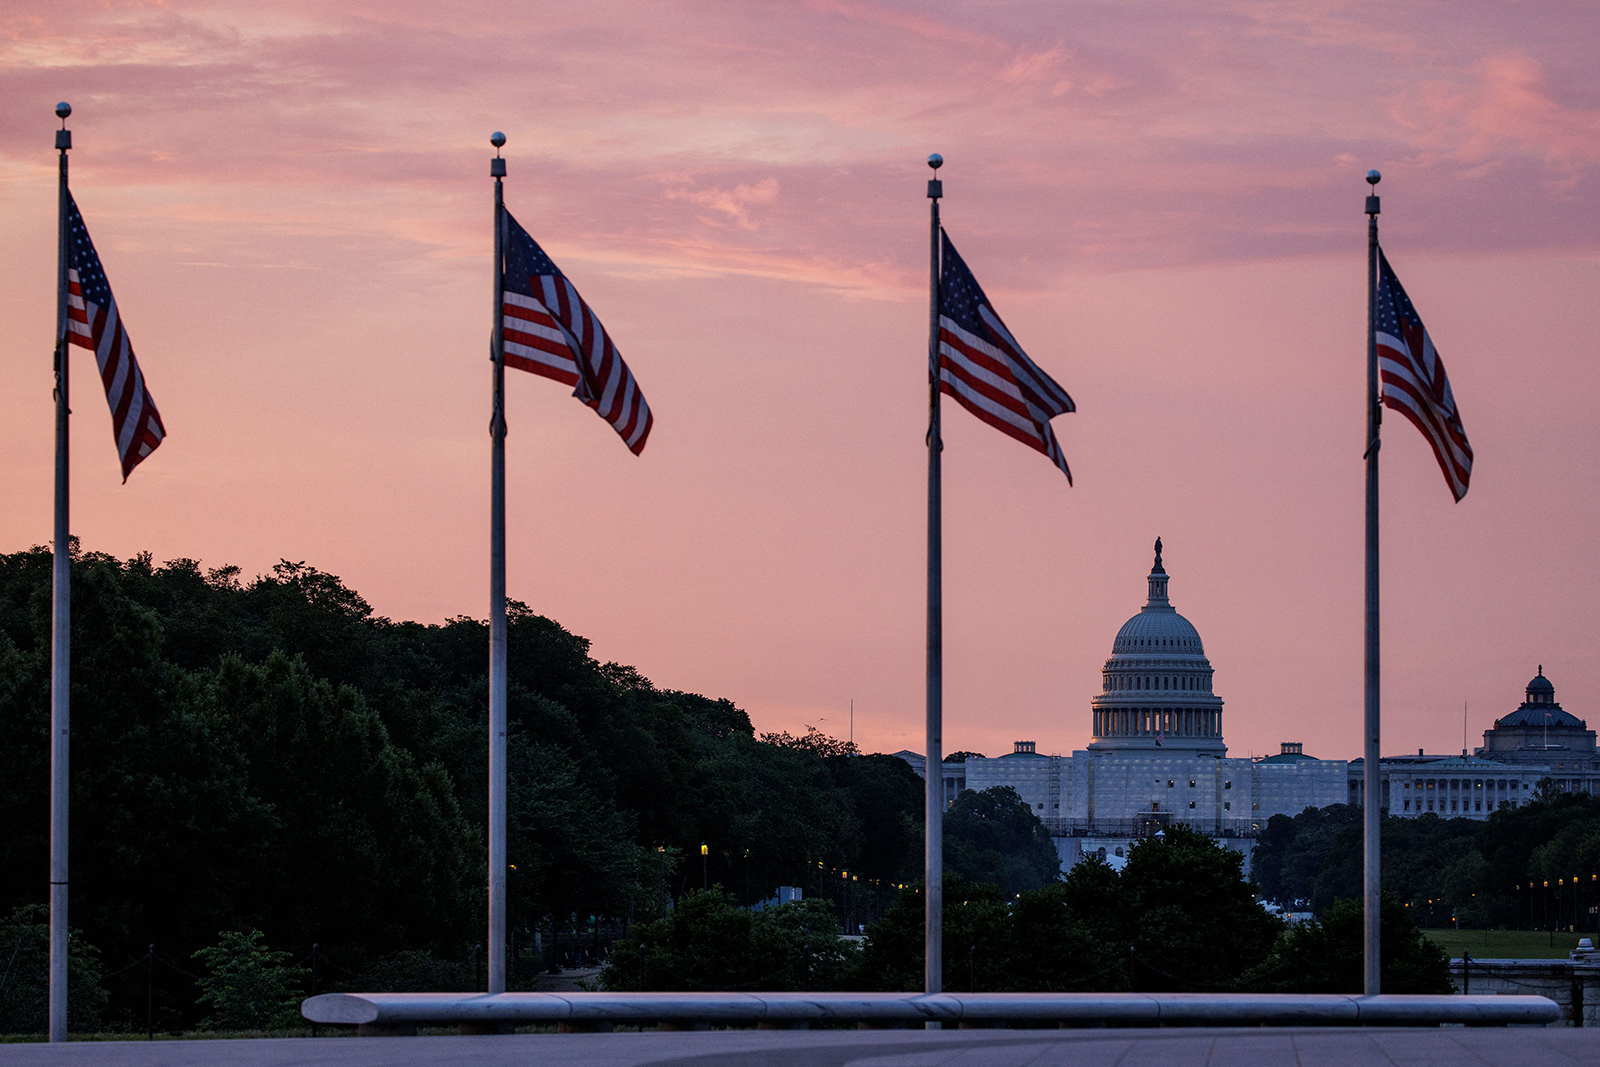 The US Capitol building is seen from the base of the Washington Monument as the sun rises in Washington, DC, on May 28.